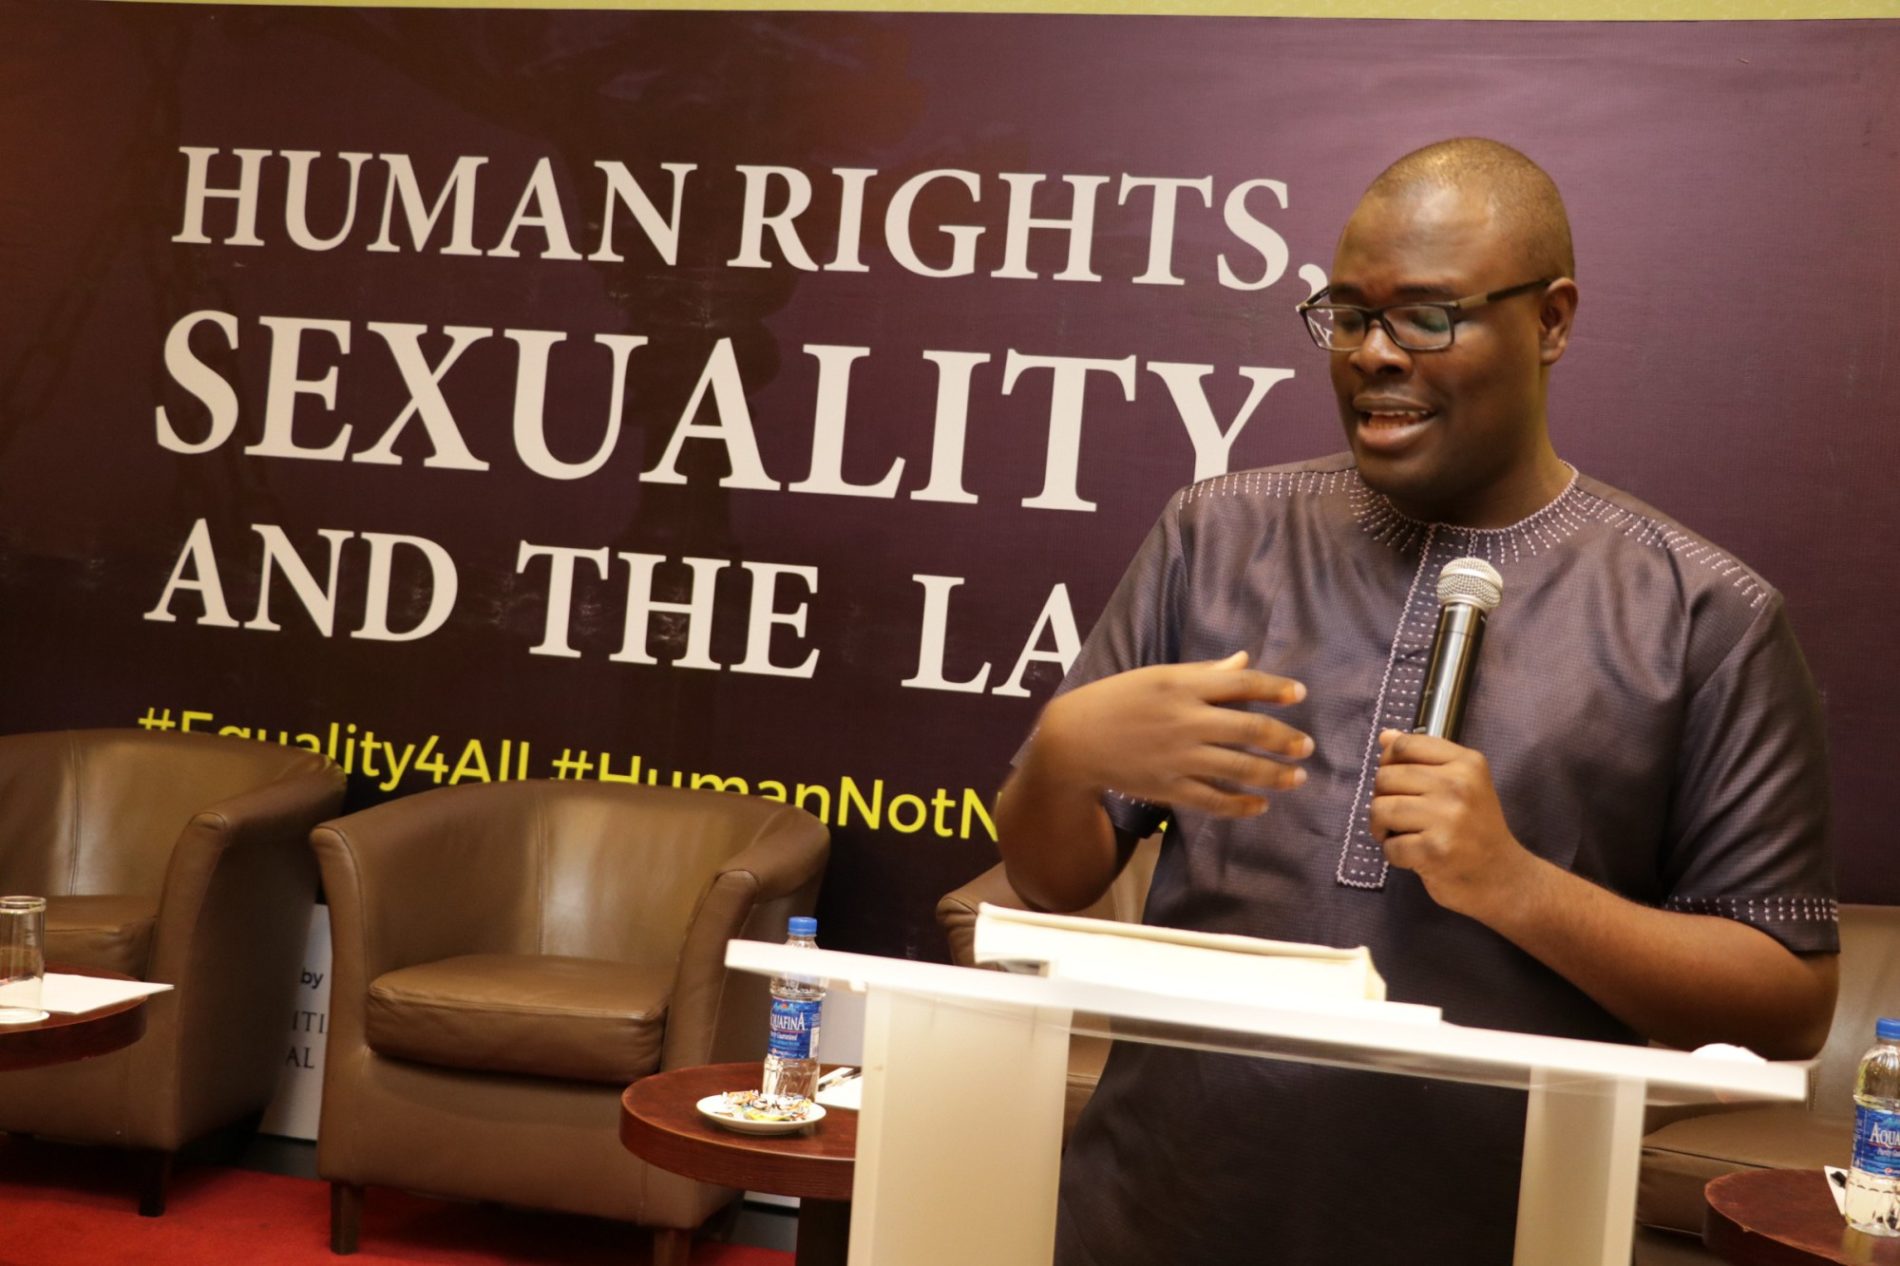 “But Who Have I Hurt If I Were Gay?” Chude Jideonwo’s Must Read Equality Speech